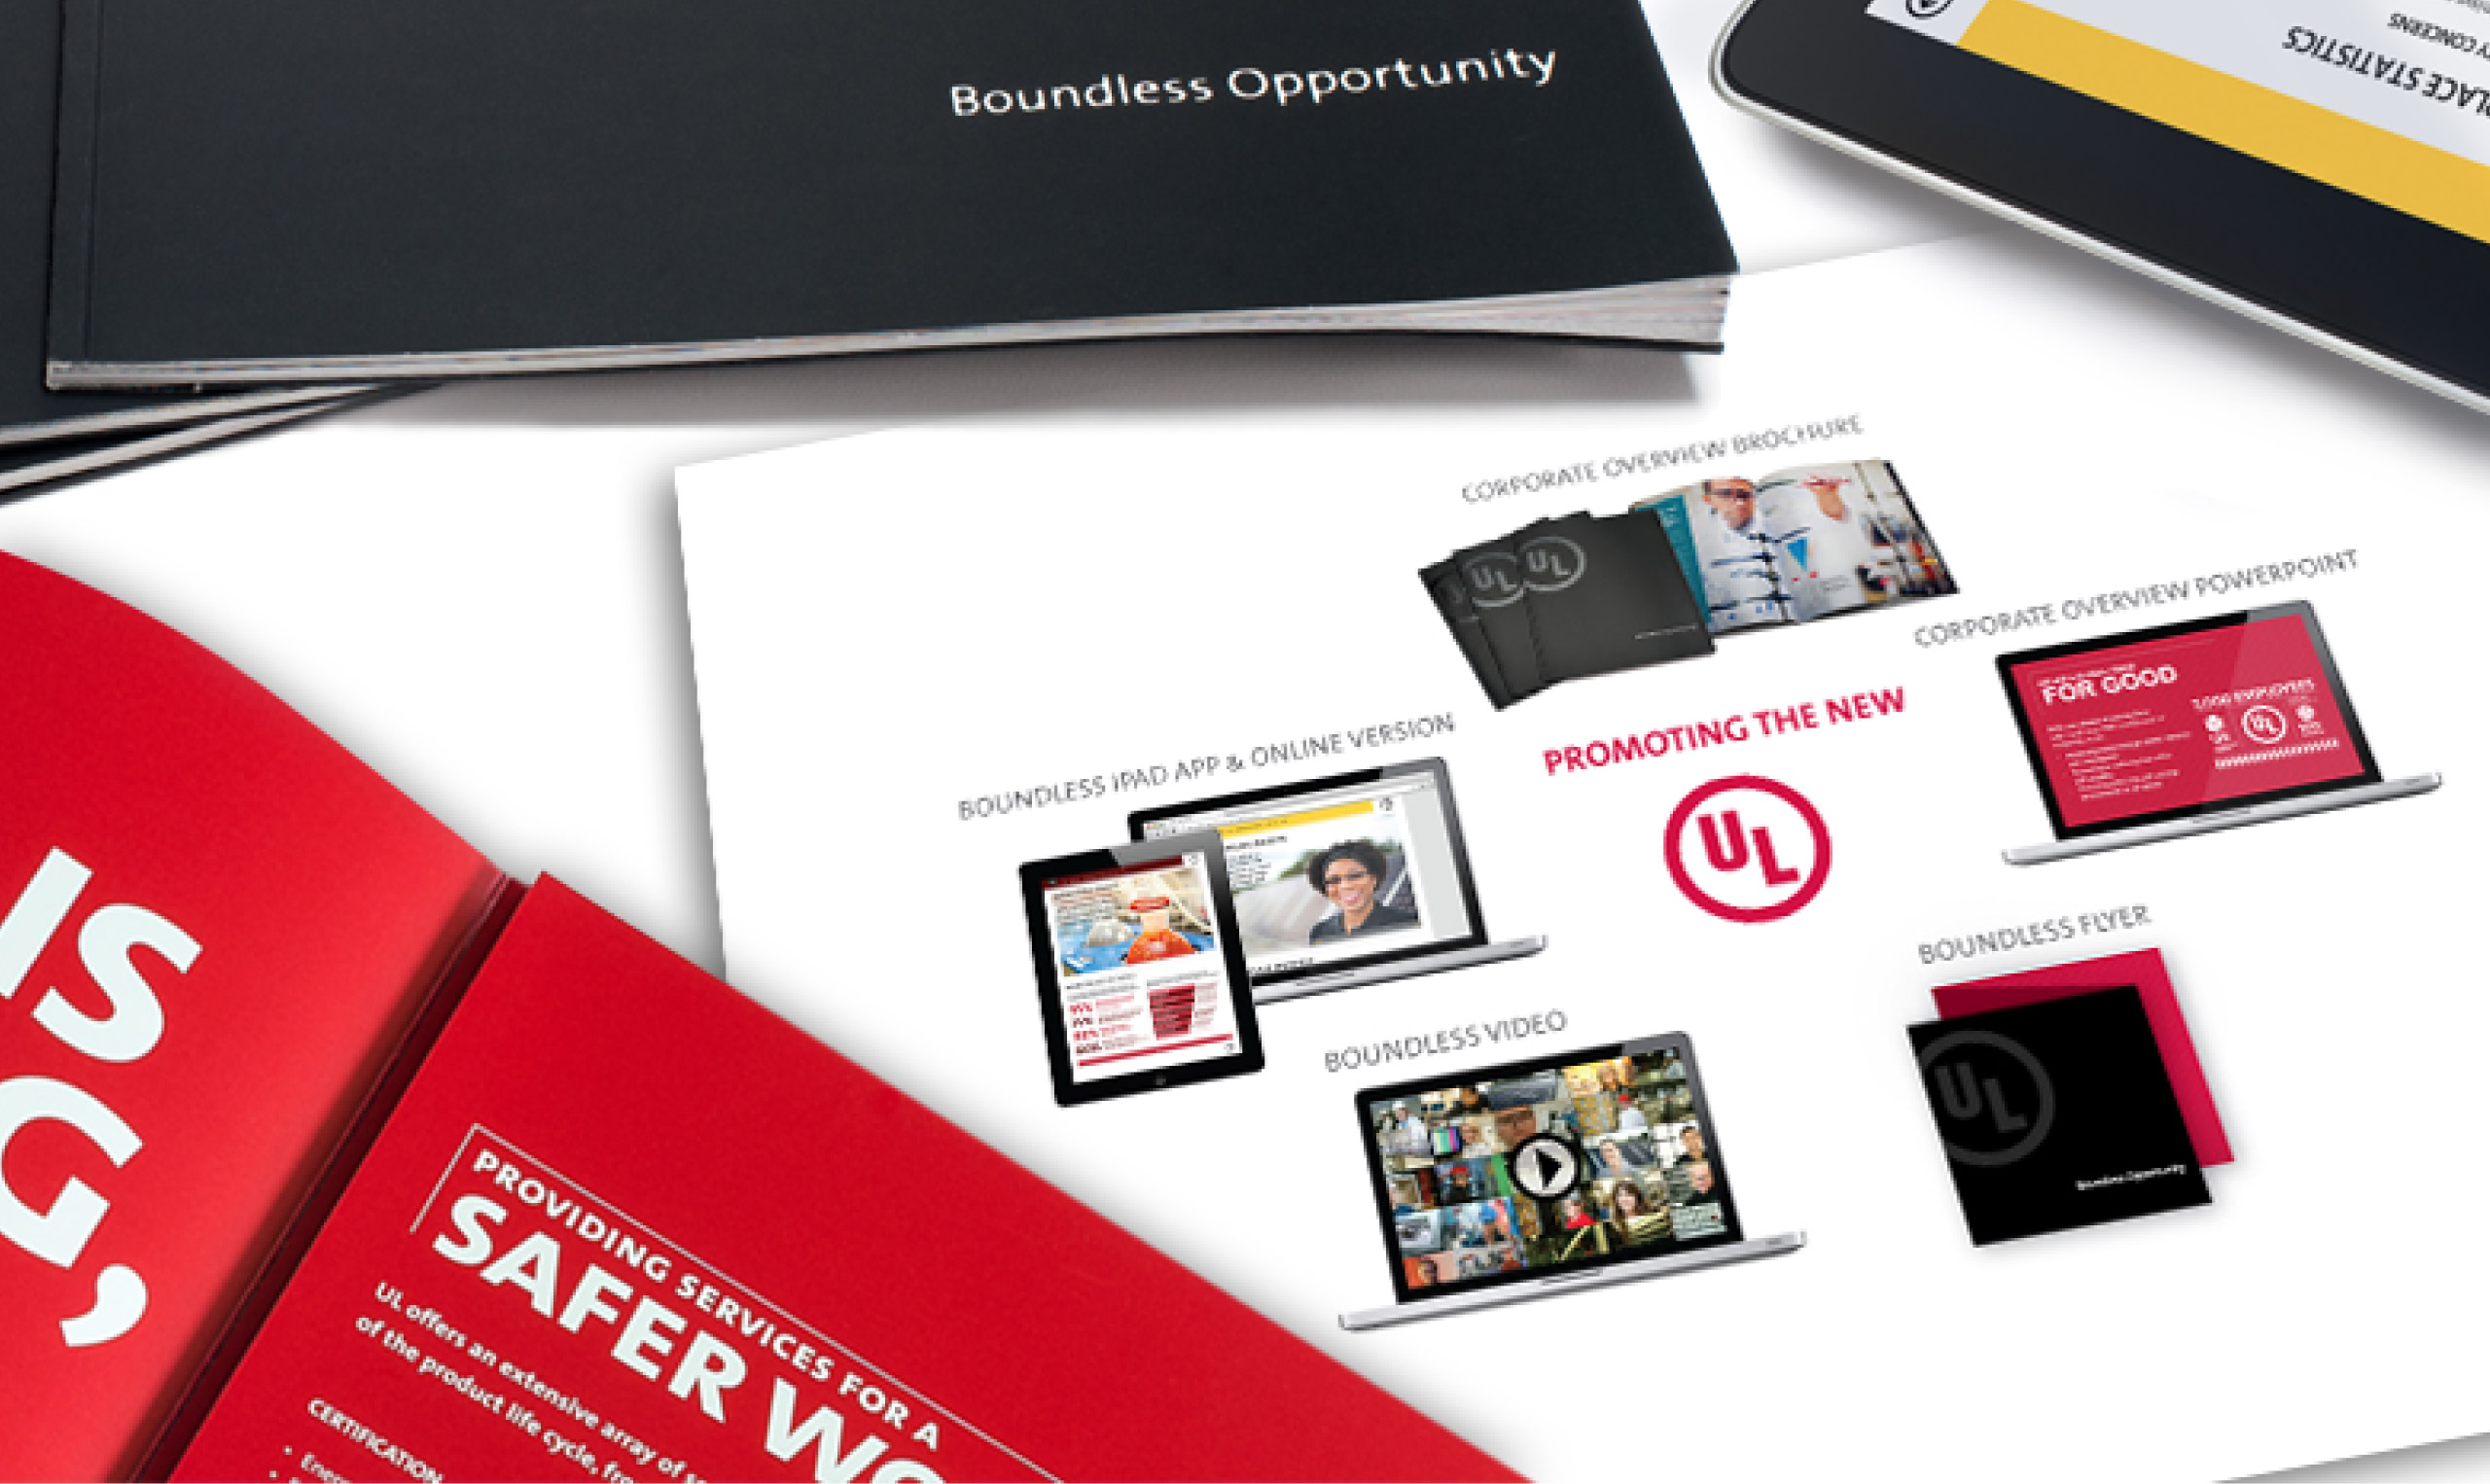 A business opportunity brochure with a tablet and a laptop.